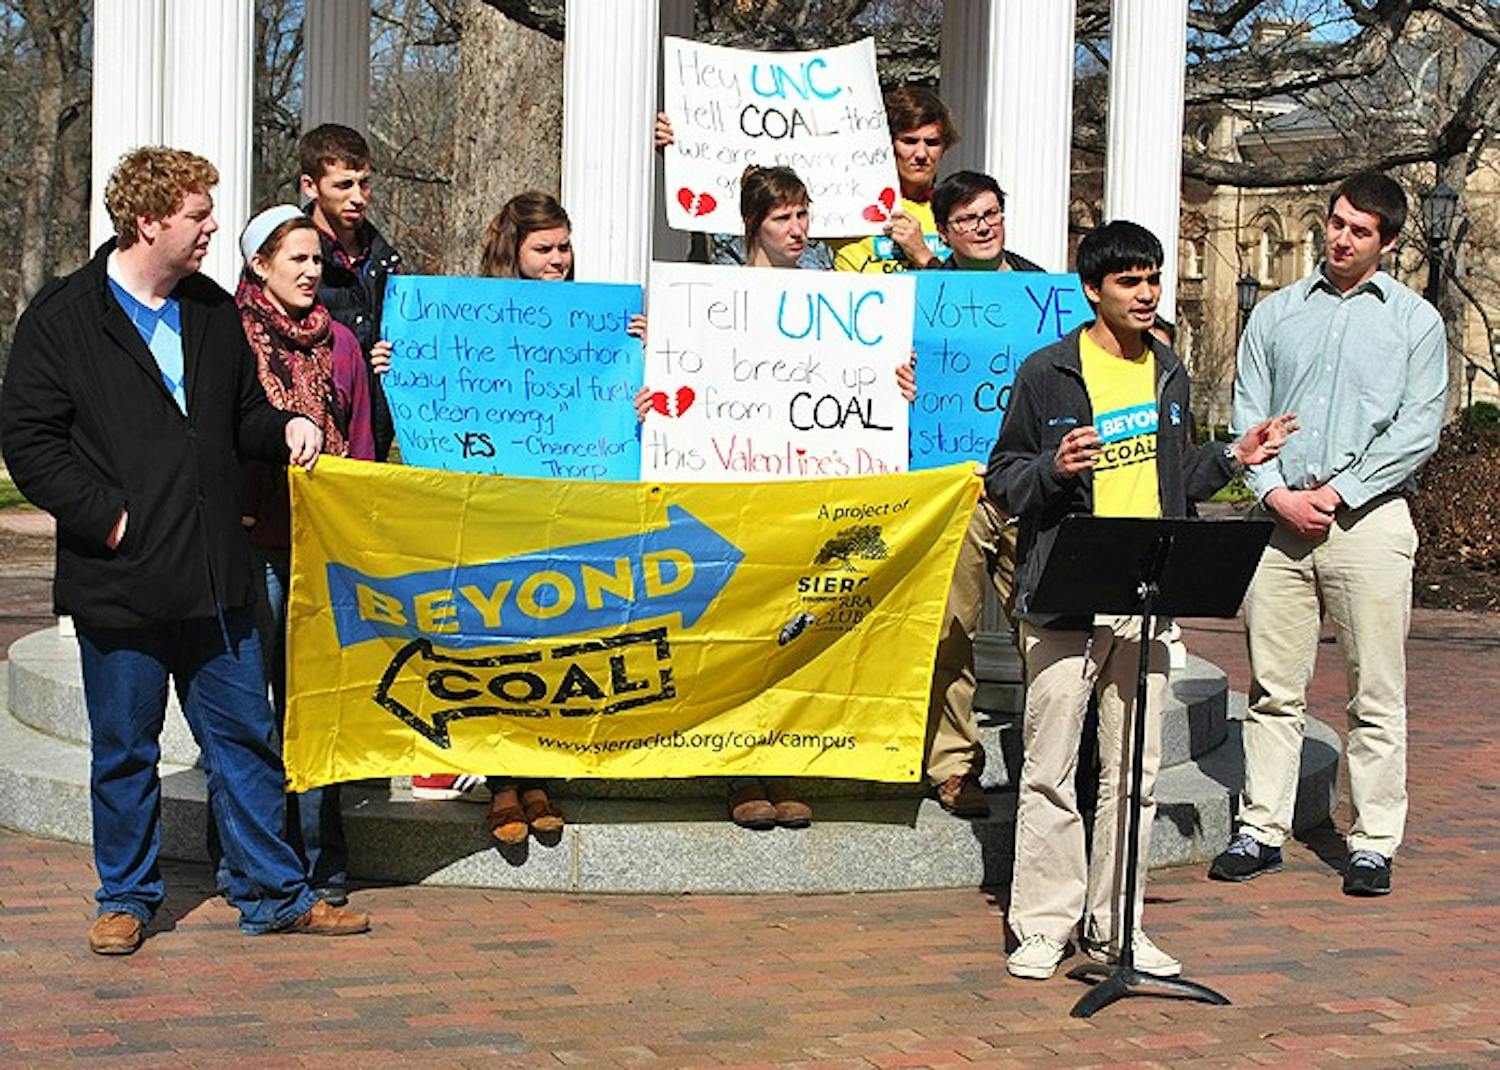 A press conference was held at the Old Well on Thursday the 14th. The group used this conference to speak out about pushing for coal divestment at UNC.